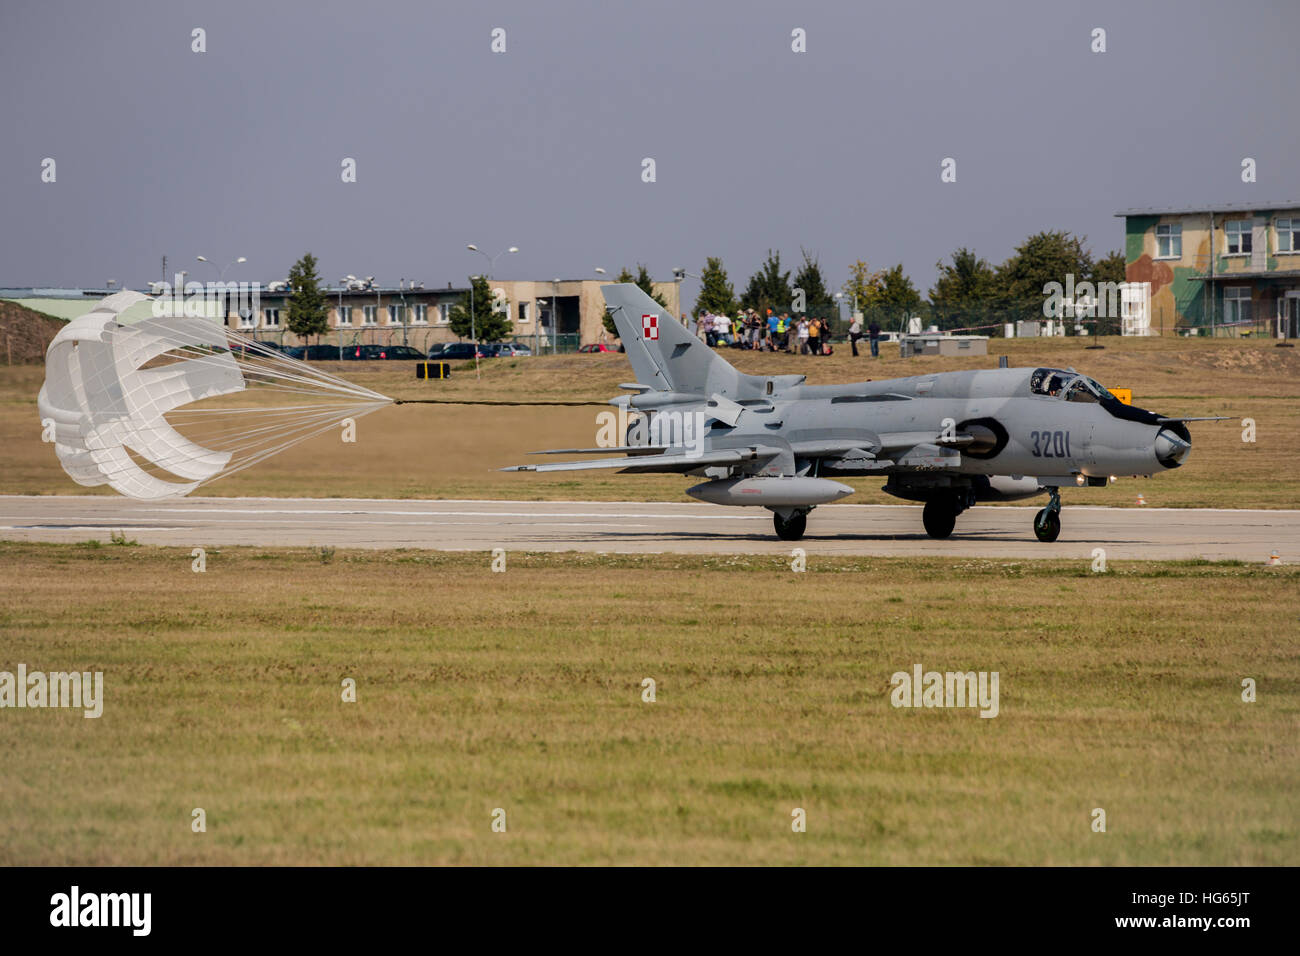 A Polish Air Force Su-22 fighter-bomber releases its drag chute upon landing. Stock Photo